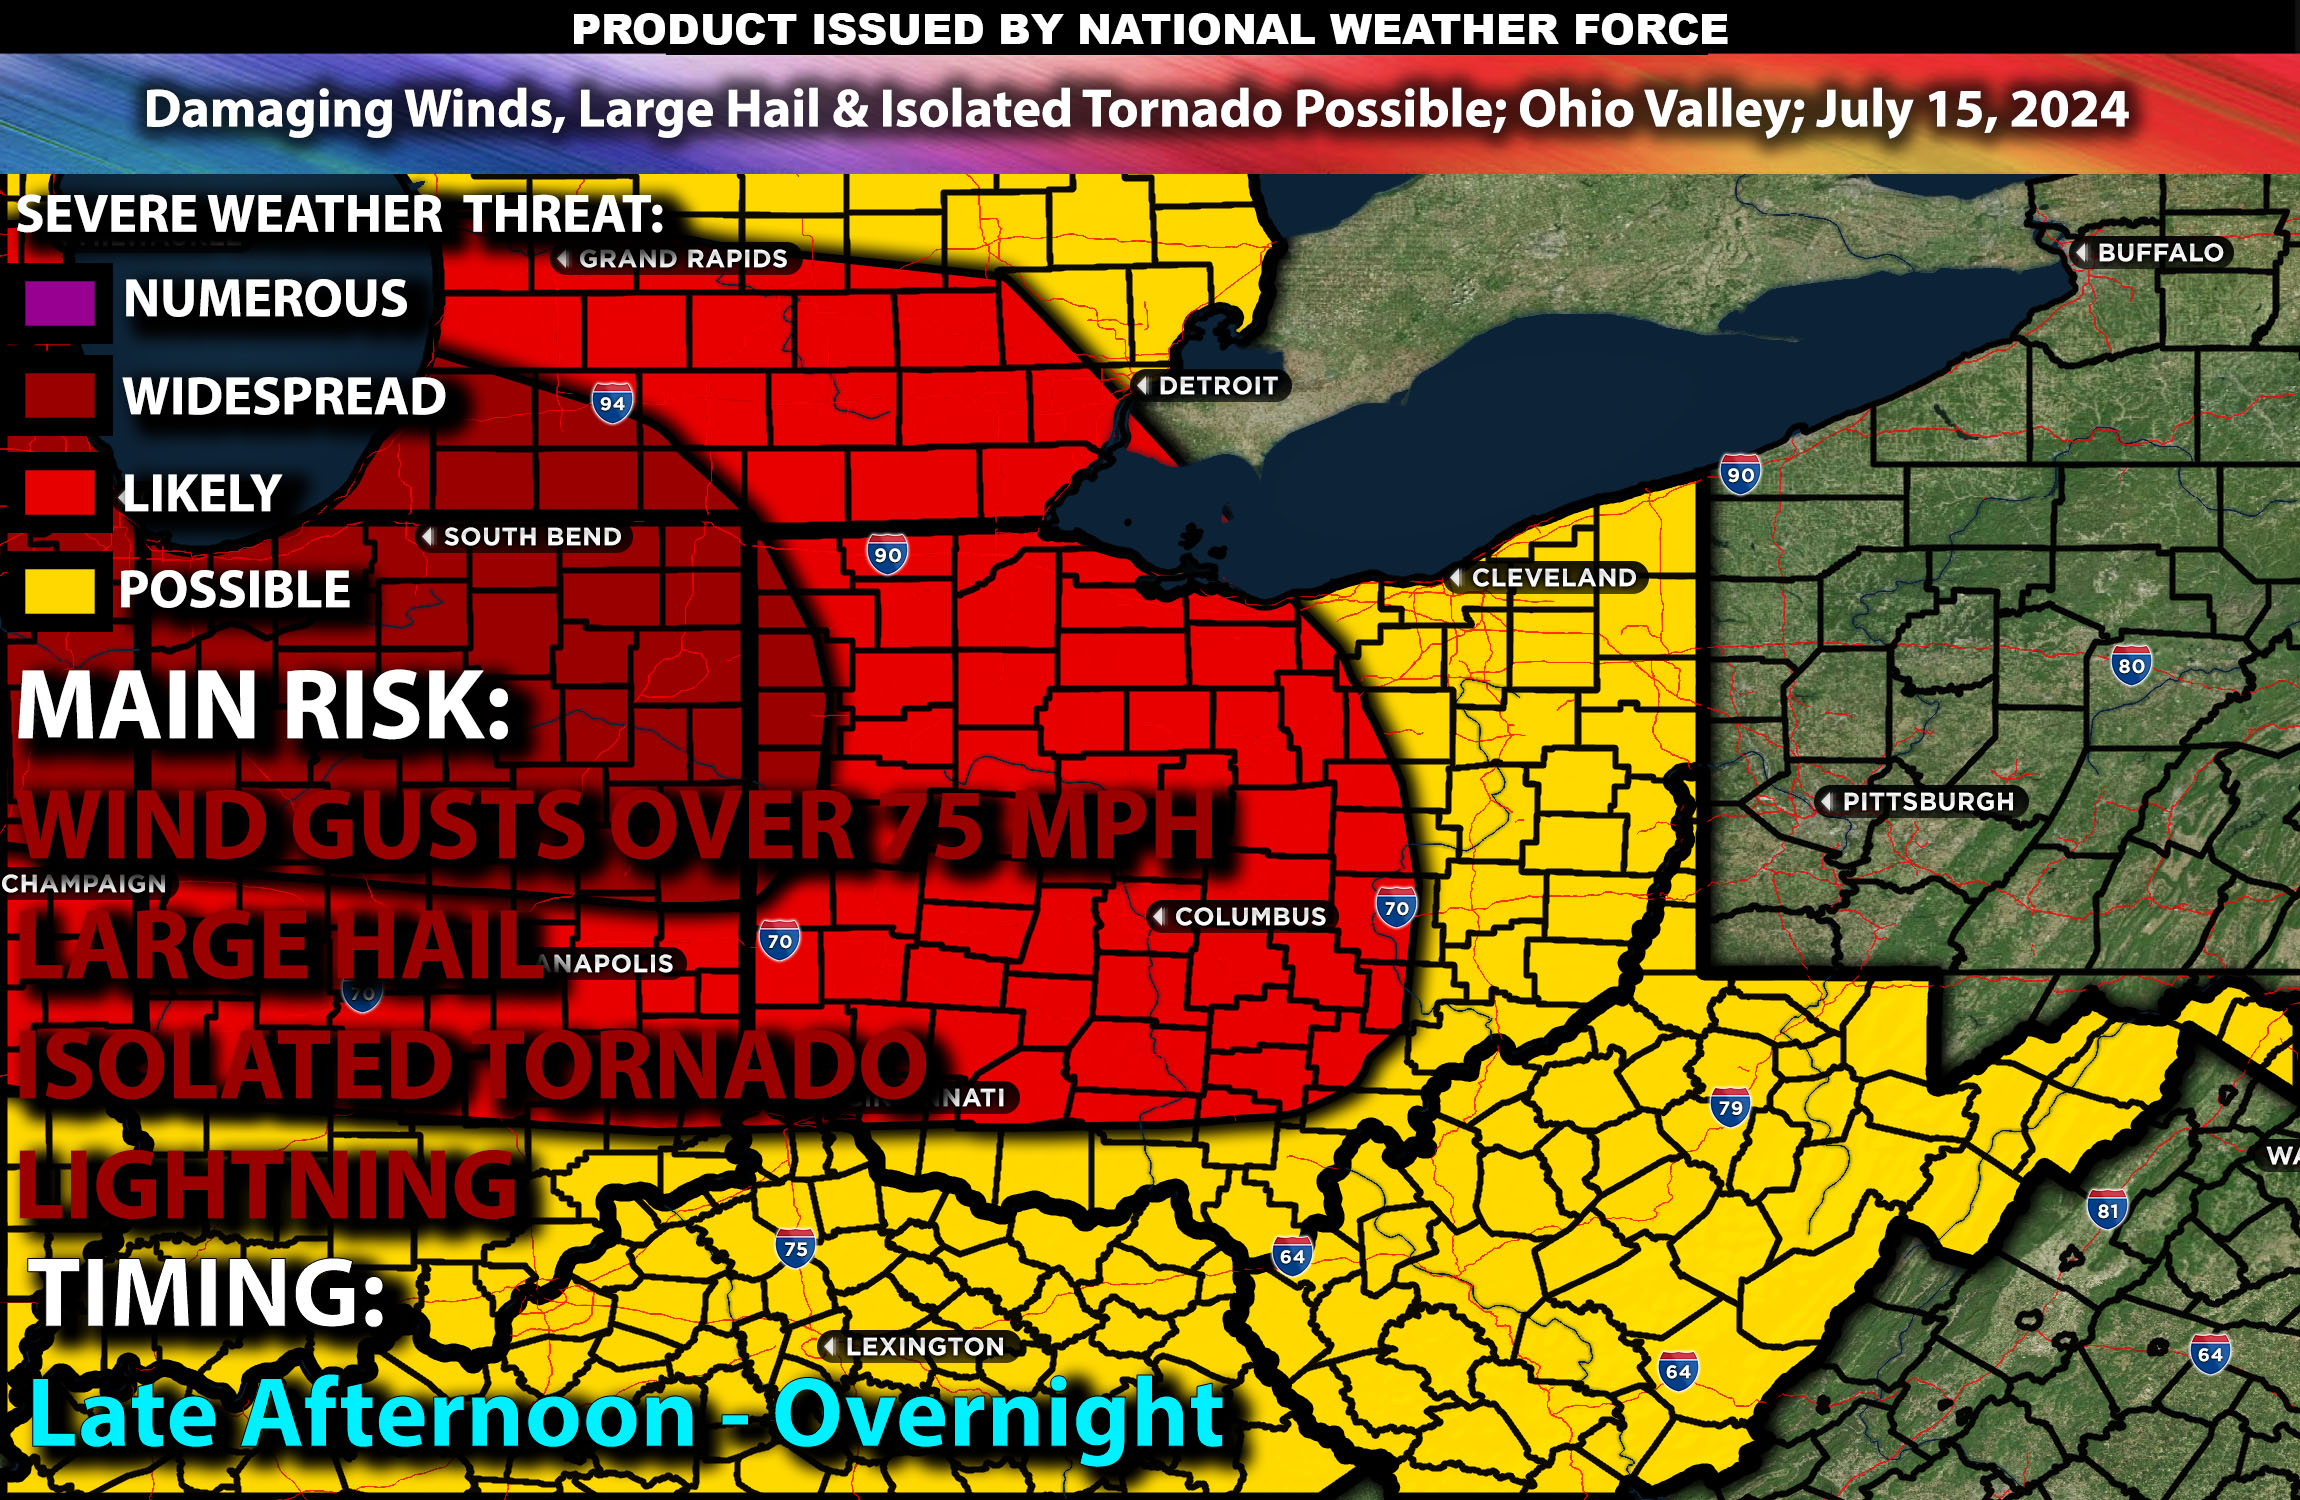 Damaging Winds, Large Hail & Isolated Tornado Possible; Ohio Valley; July 15, 2024